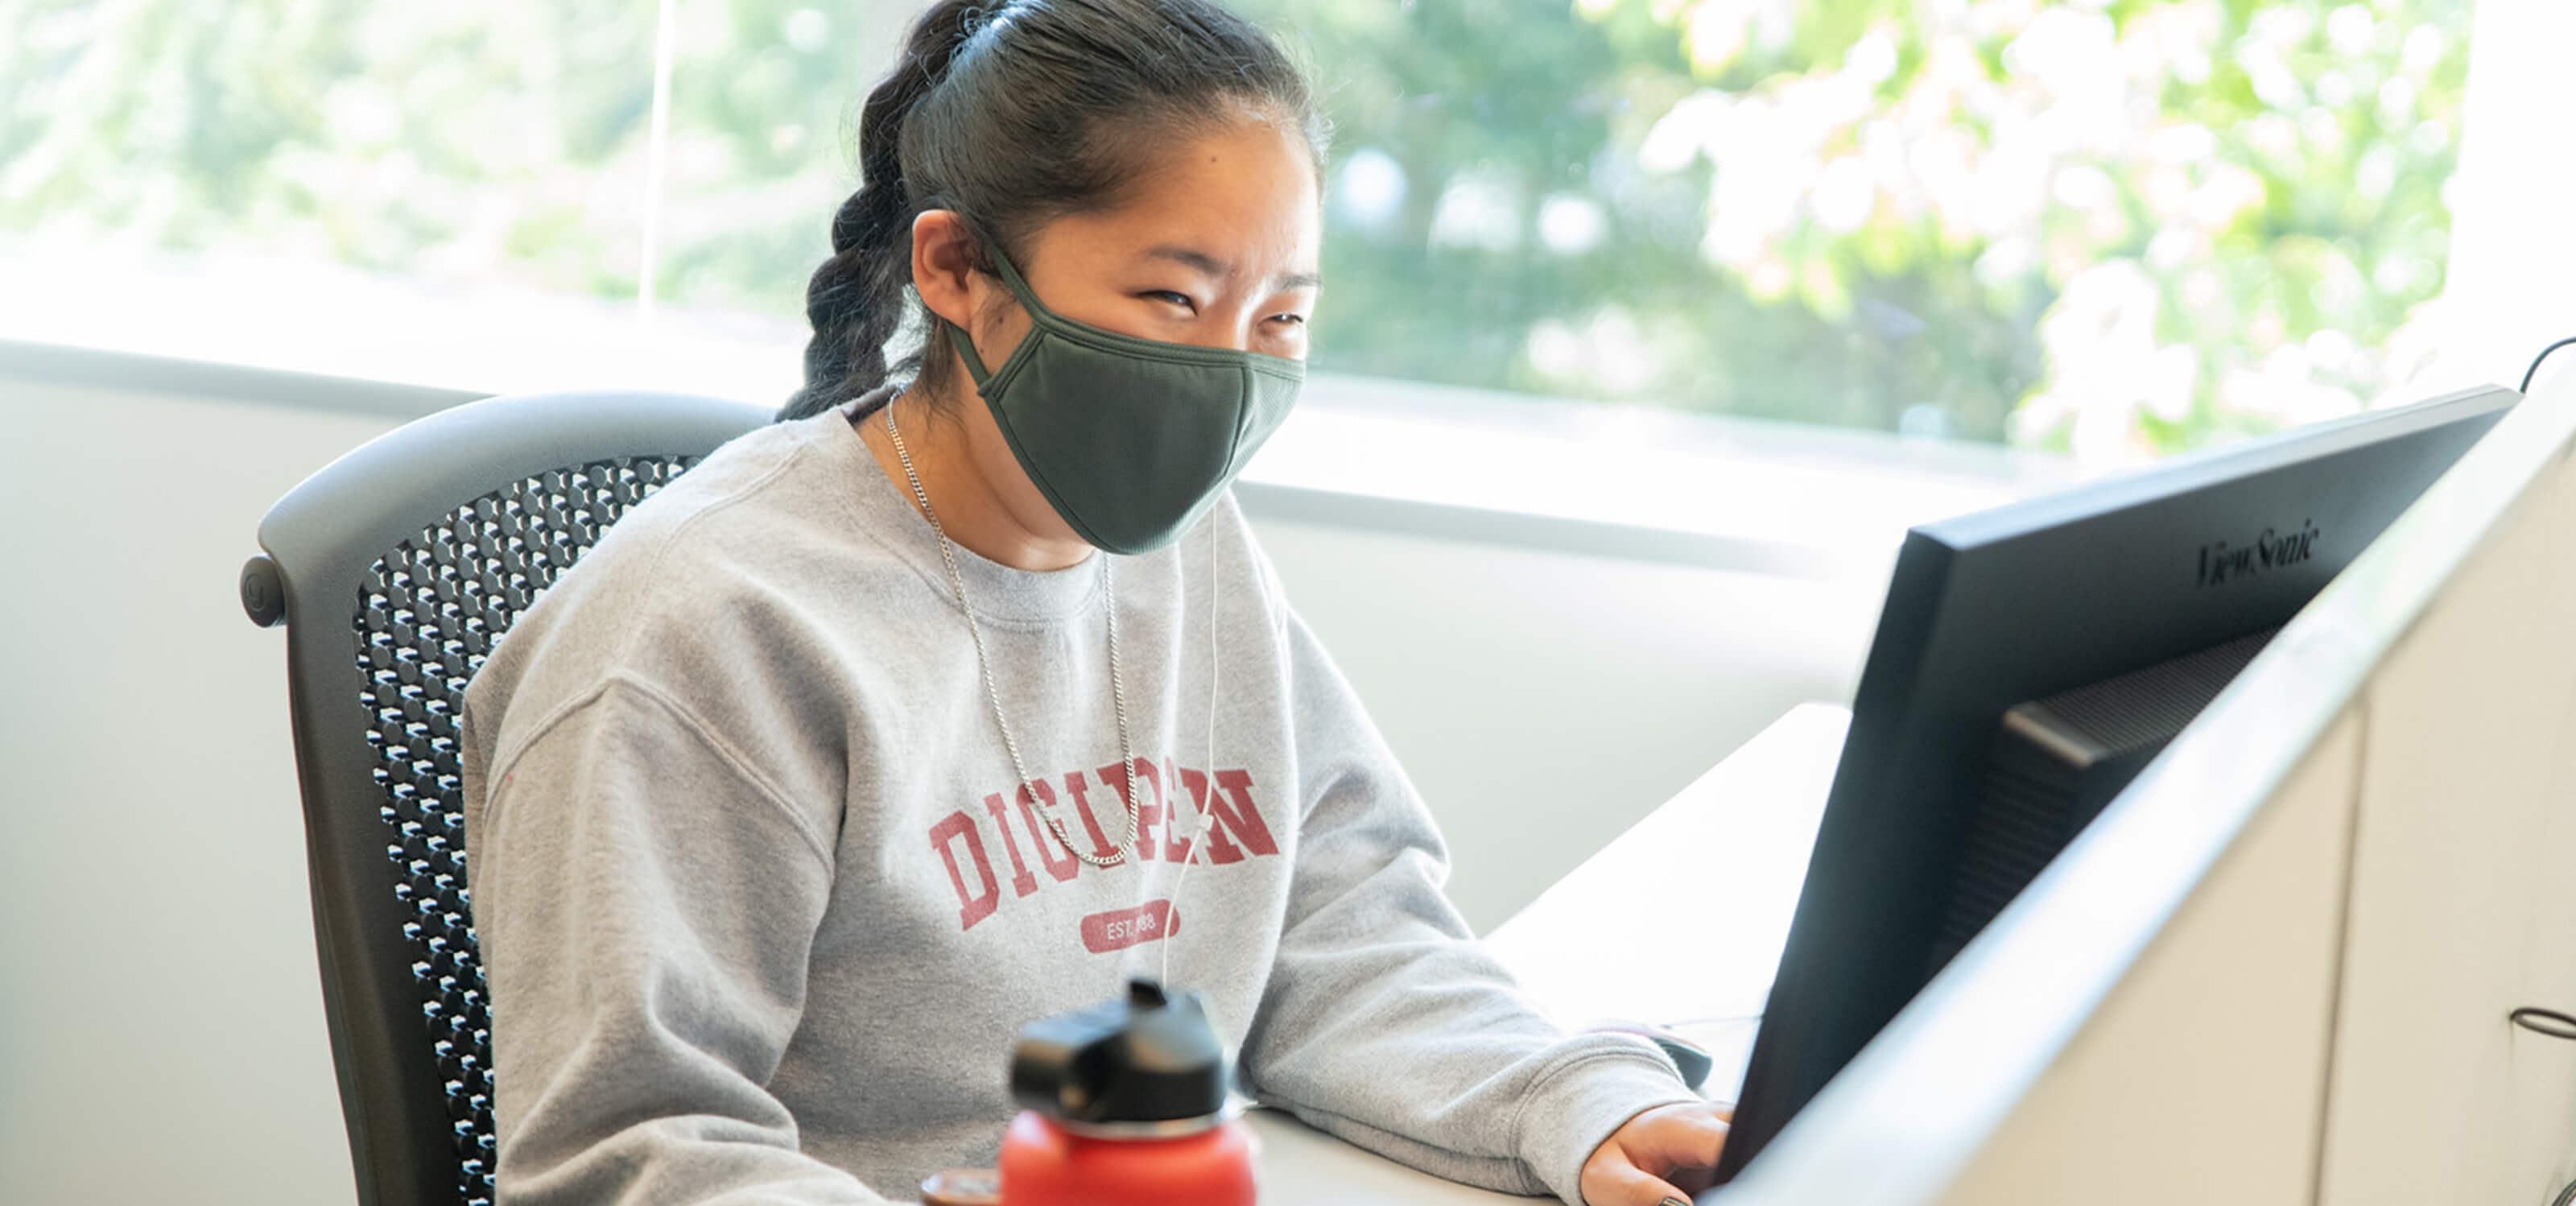 A student wearing a facemask and DigiPen sweatshirt sits in front of a computer screen.